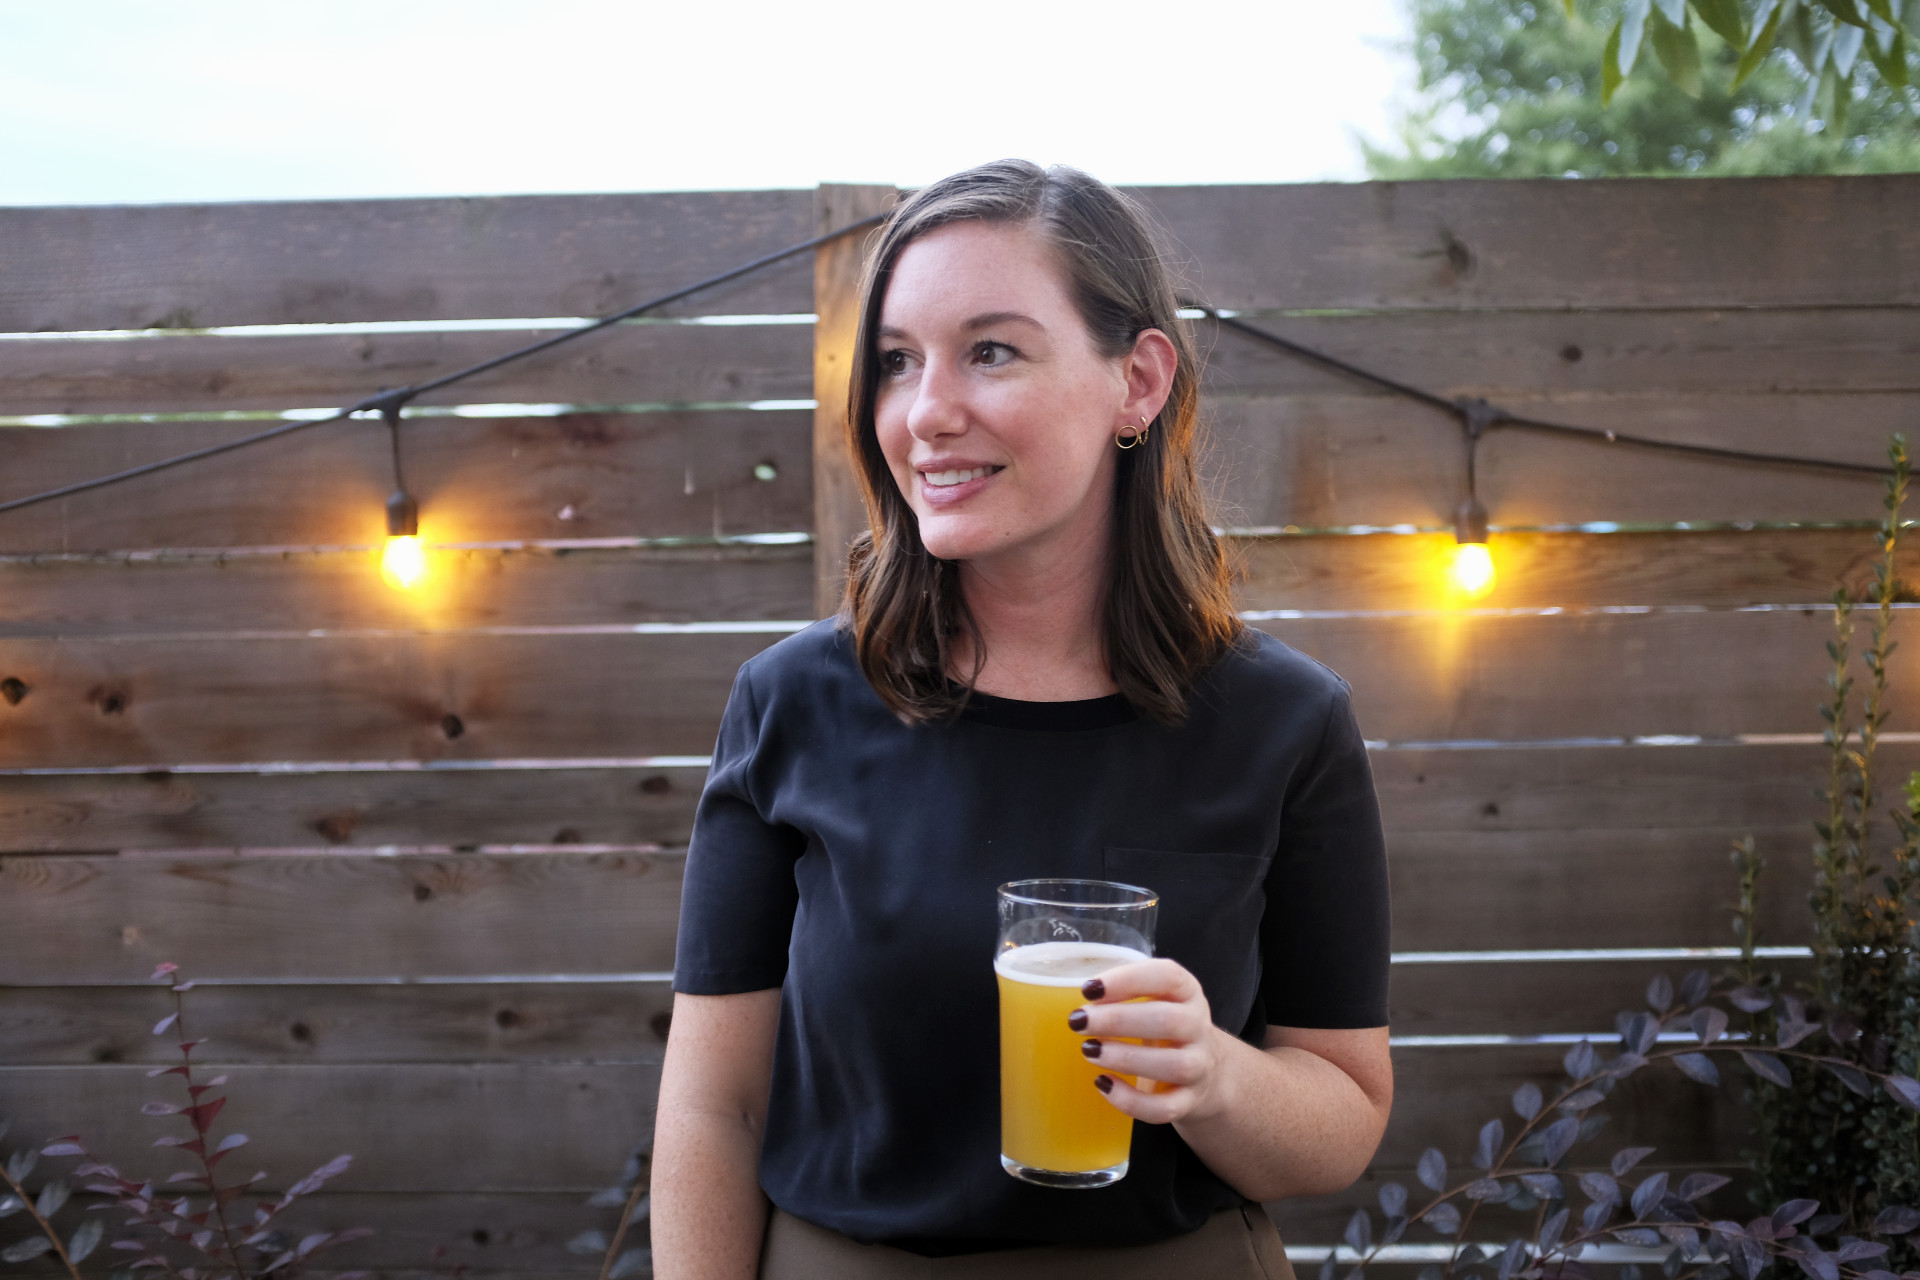 Krystal is standing in front of a wooden fence with string lights hung. She is wearing a black silk tee and holding a golden, hazy beer and smiling while looking left.